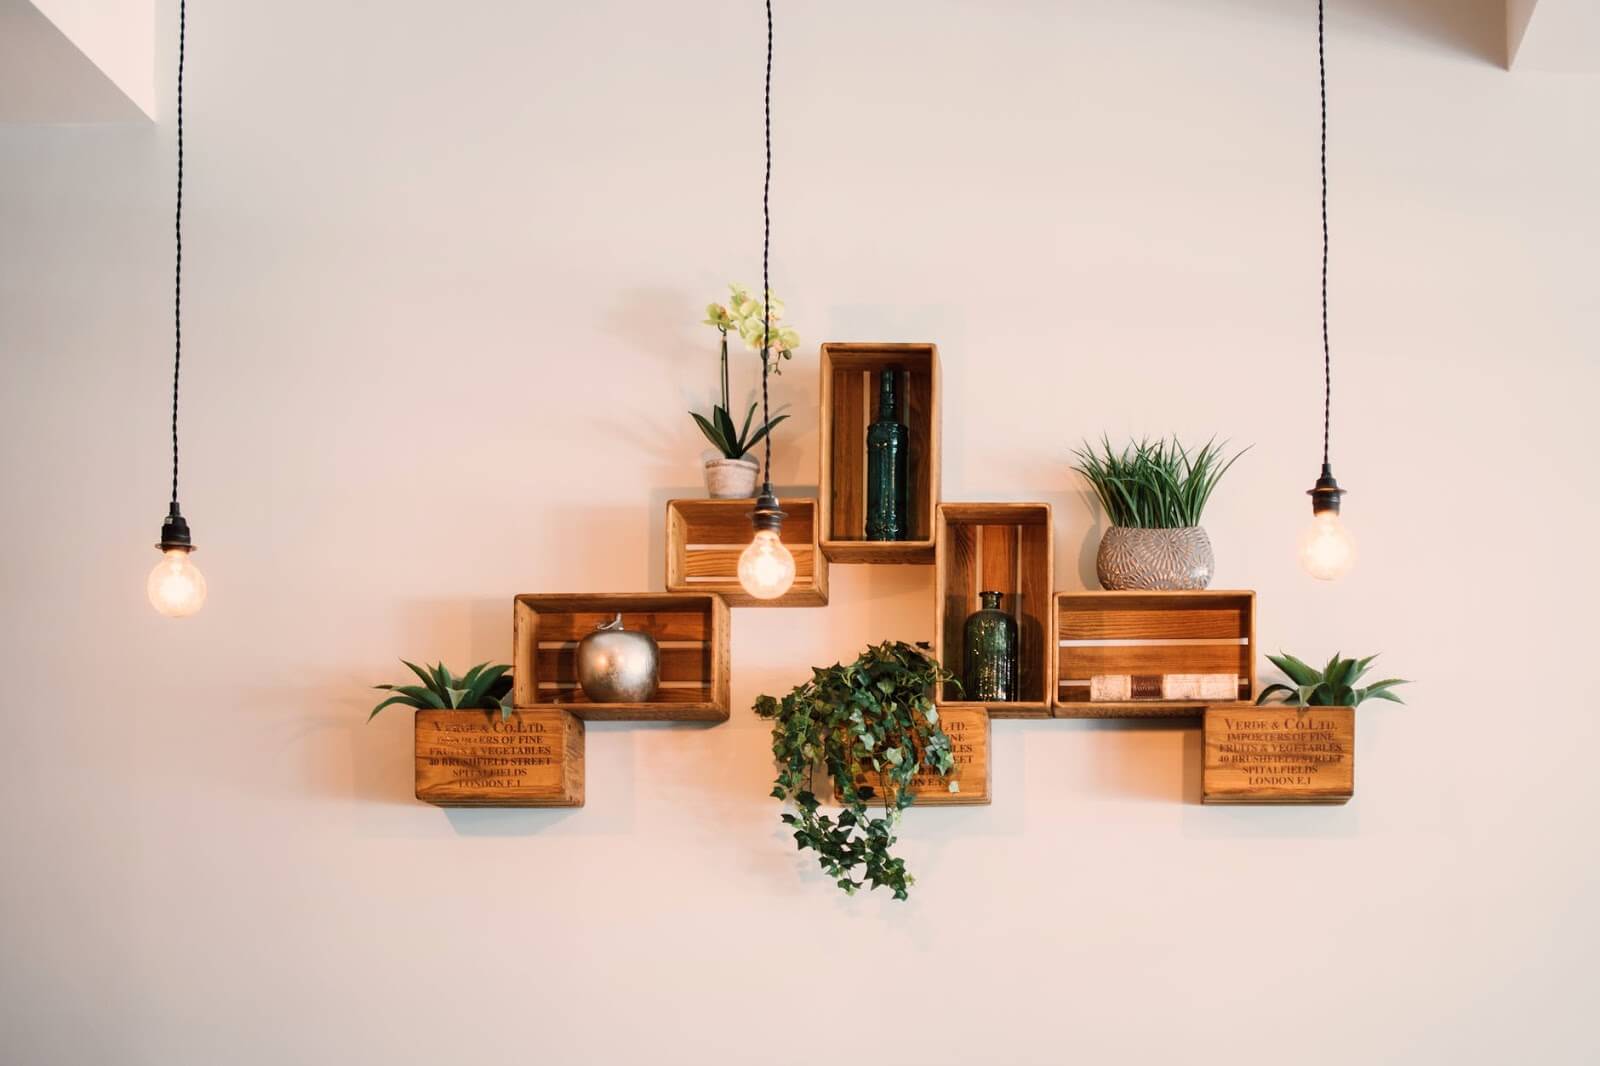 How To Use Floating Shelves Decorate, How To Place Floating Shelves